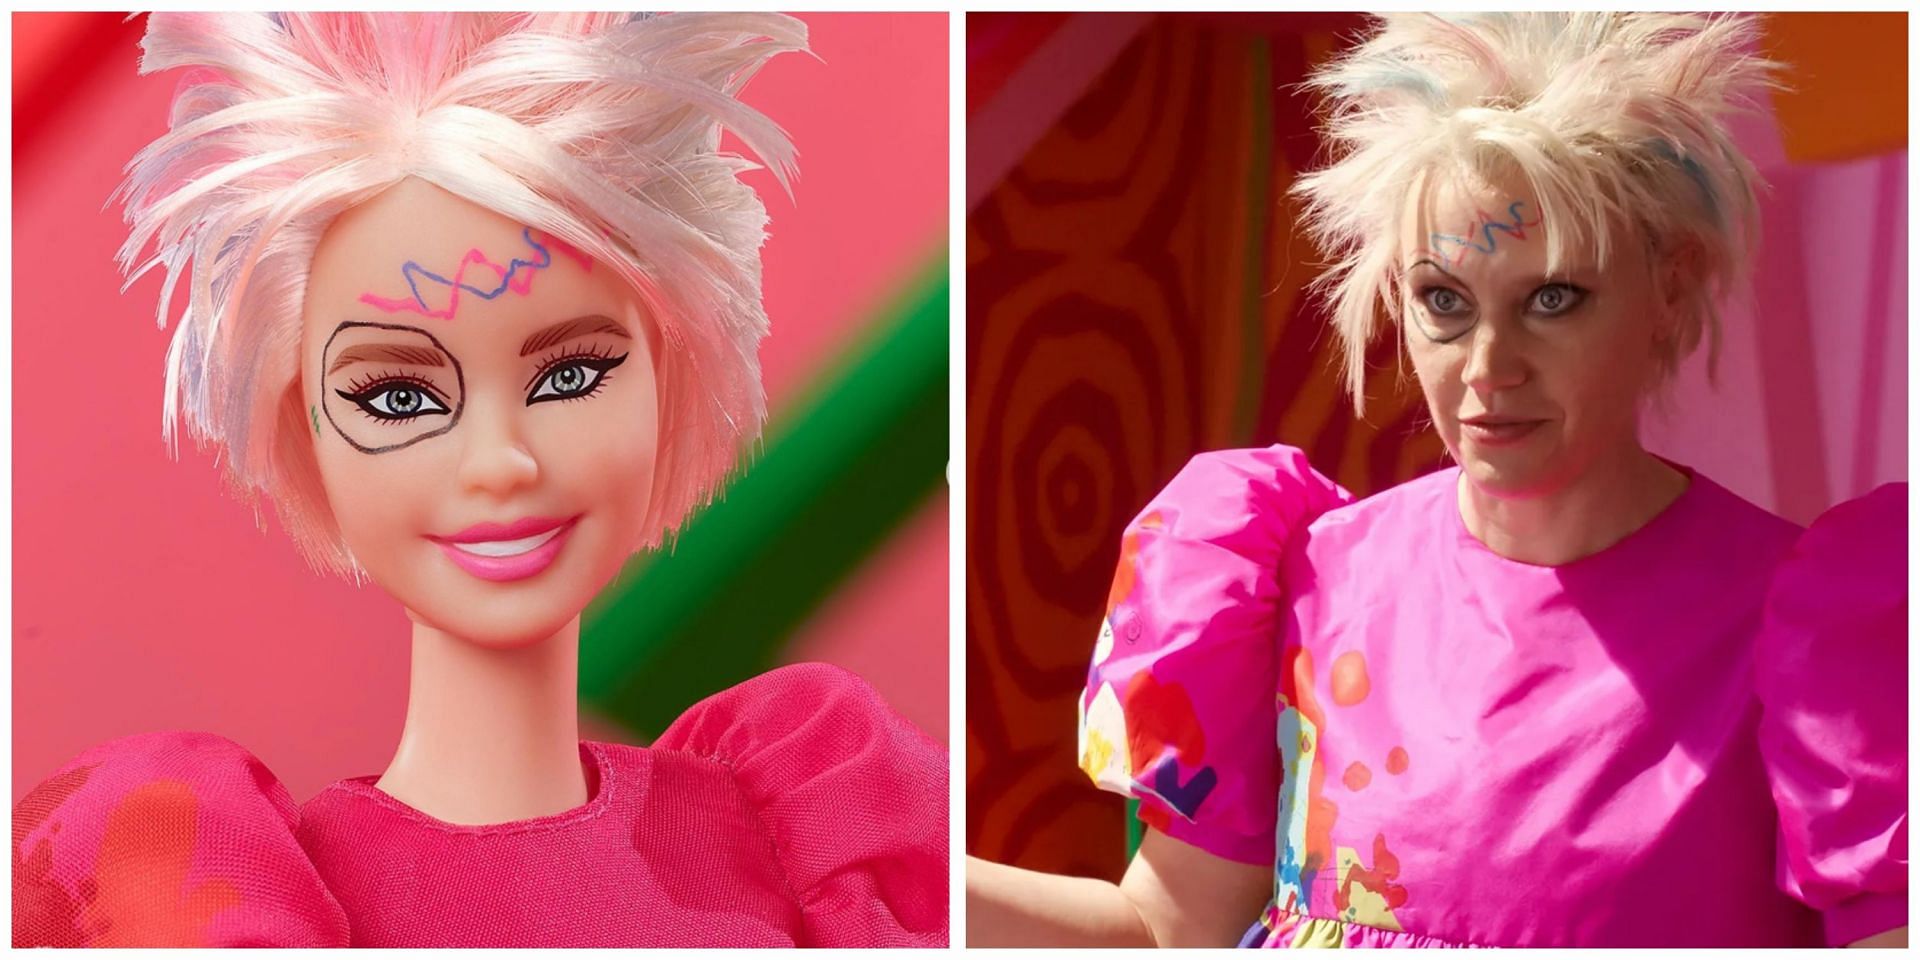 Social media users ecstatic as Mattel share the news of the launch of a new barbie, which has been inspired by Kate McKinnon&rsquo;s character in the movie. (Image via @Barbie/ Instagram)